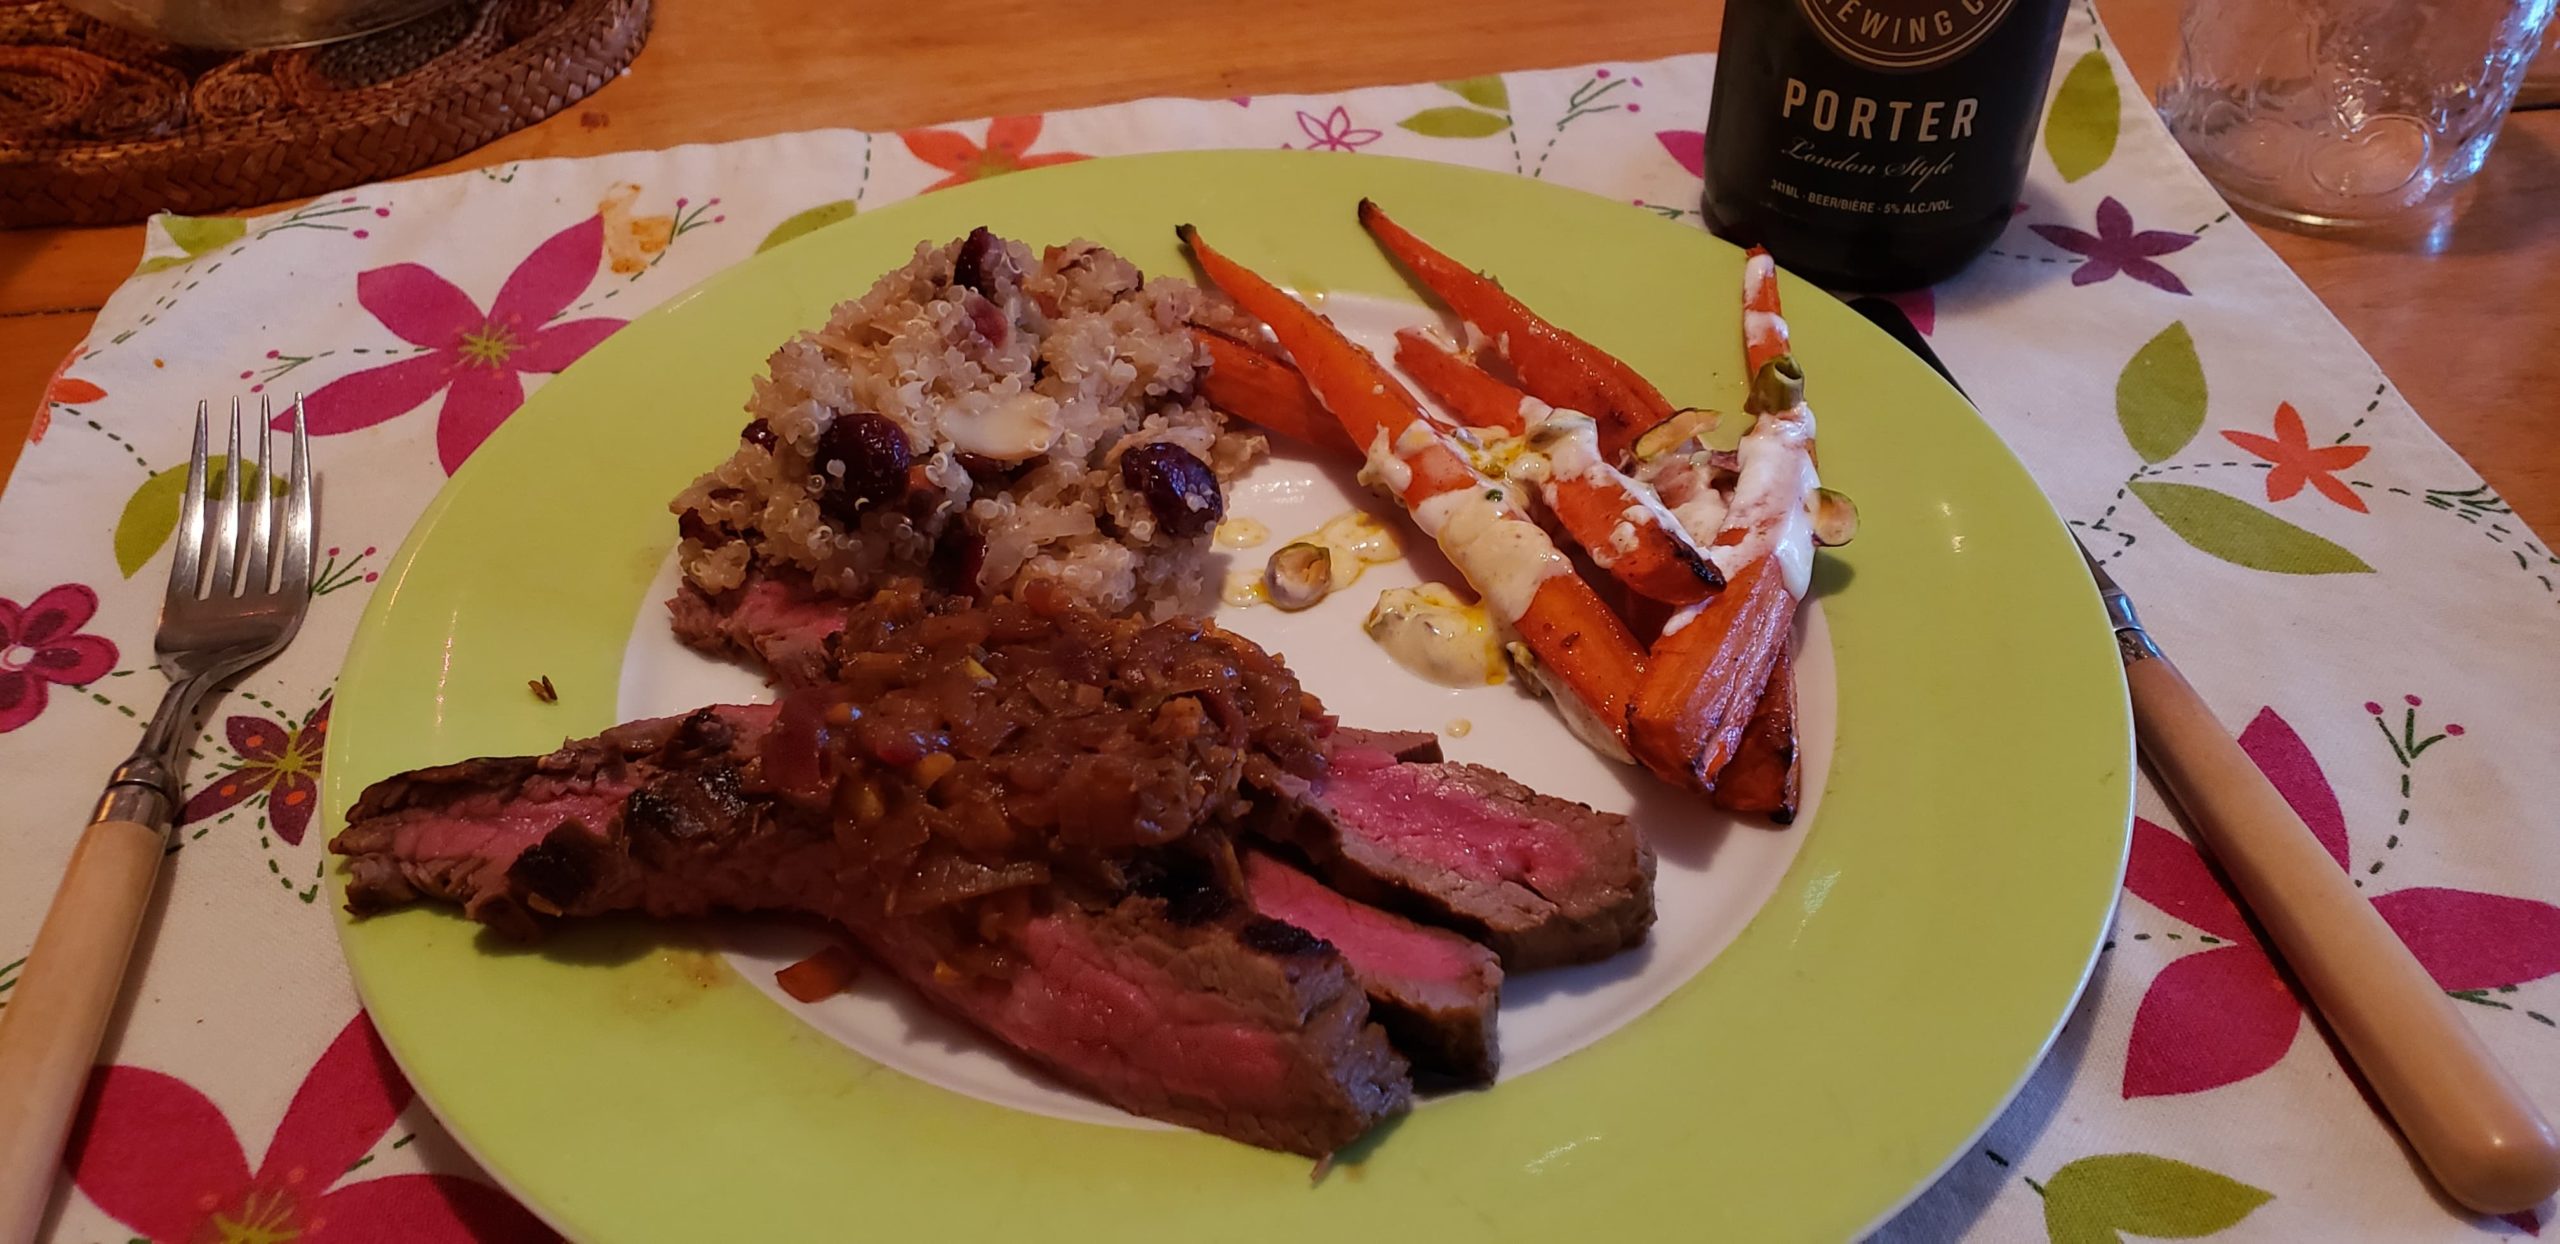 Plate showing a serving of flank steak, spiced roasted carrots, and quinoa pilaf with cranberries and almonds on a cheery spring placemat